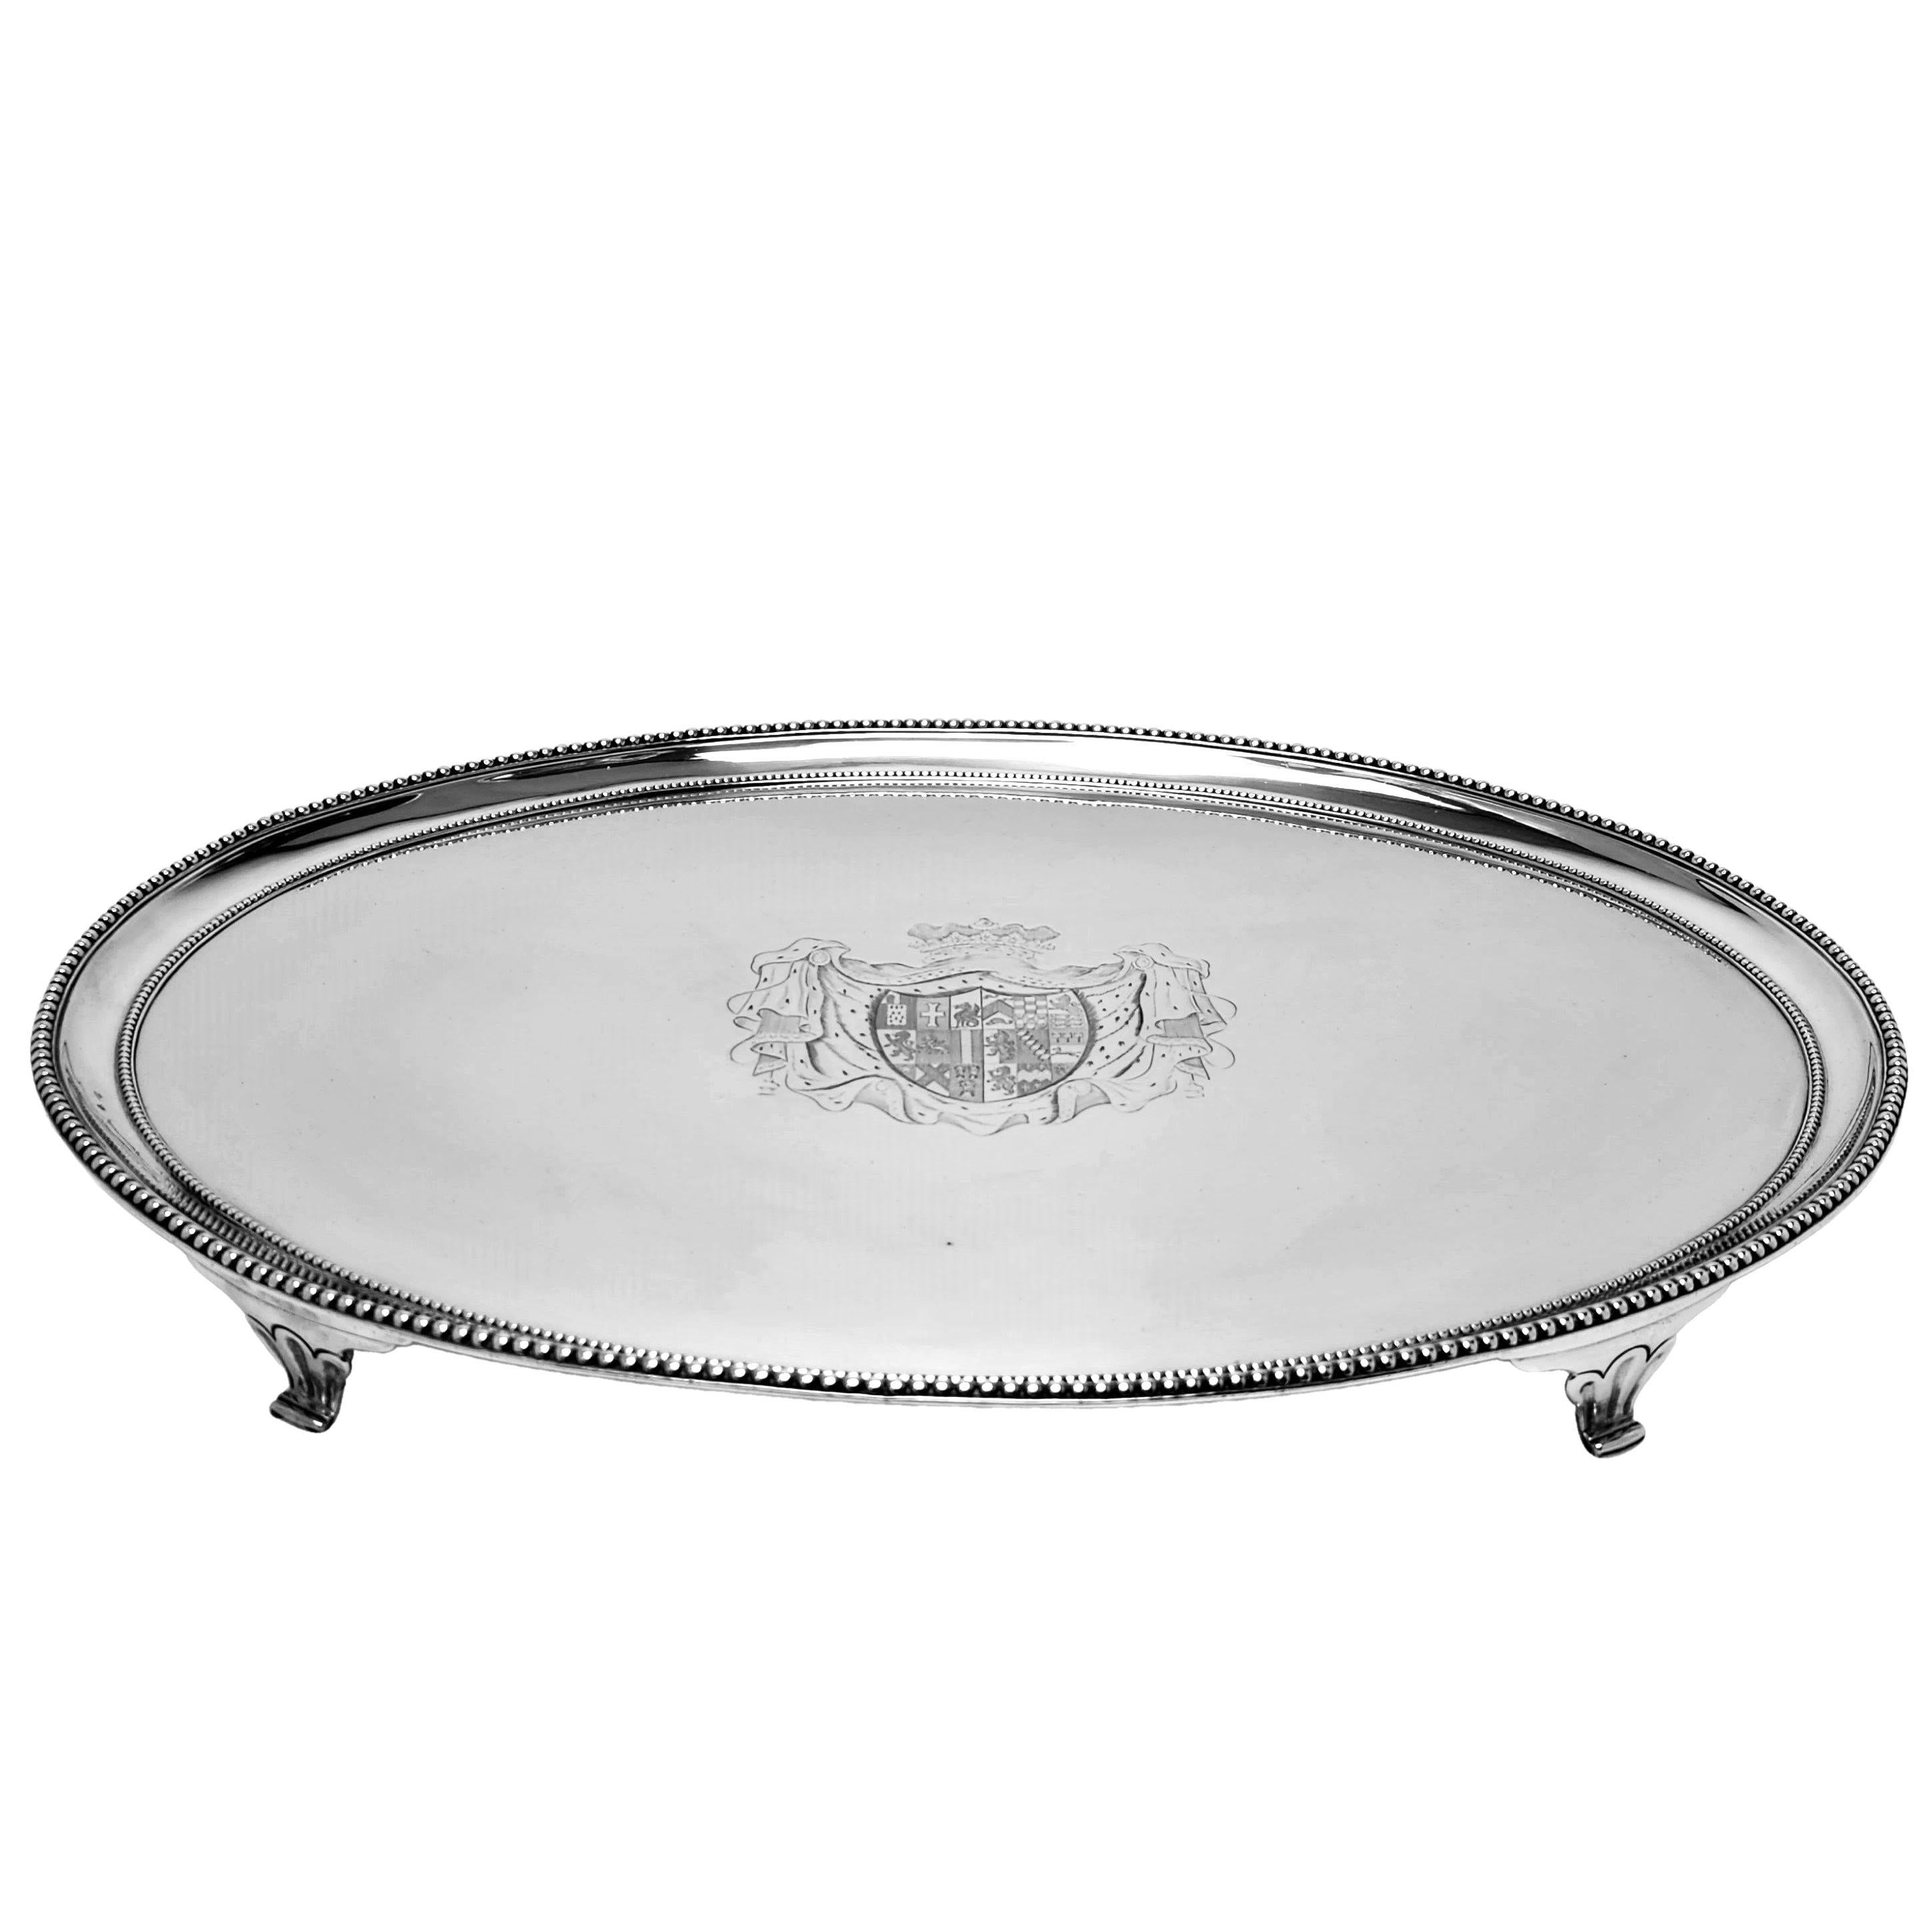 An impressive Antique sterling Silver Salver in an elegant oval shape and standing on four feet. The Salver has large armorial engraved in the centre and the Salver has a classic applied bead border on the top and bottom of the rim.

This Salver is